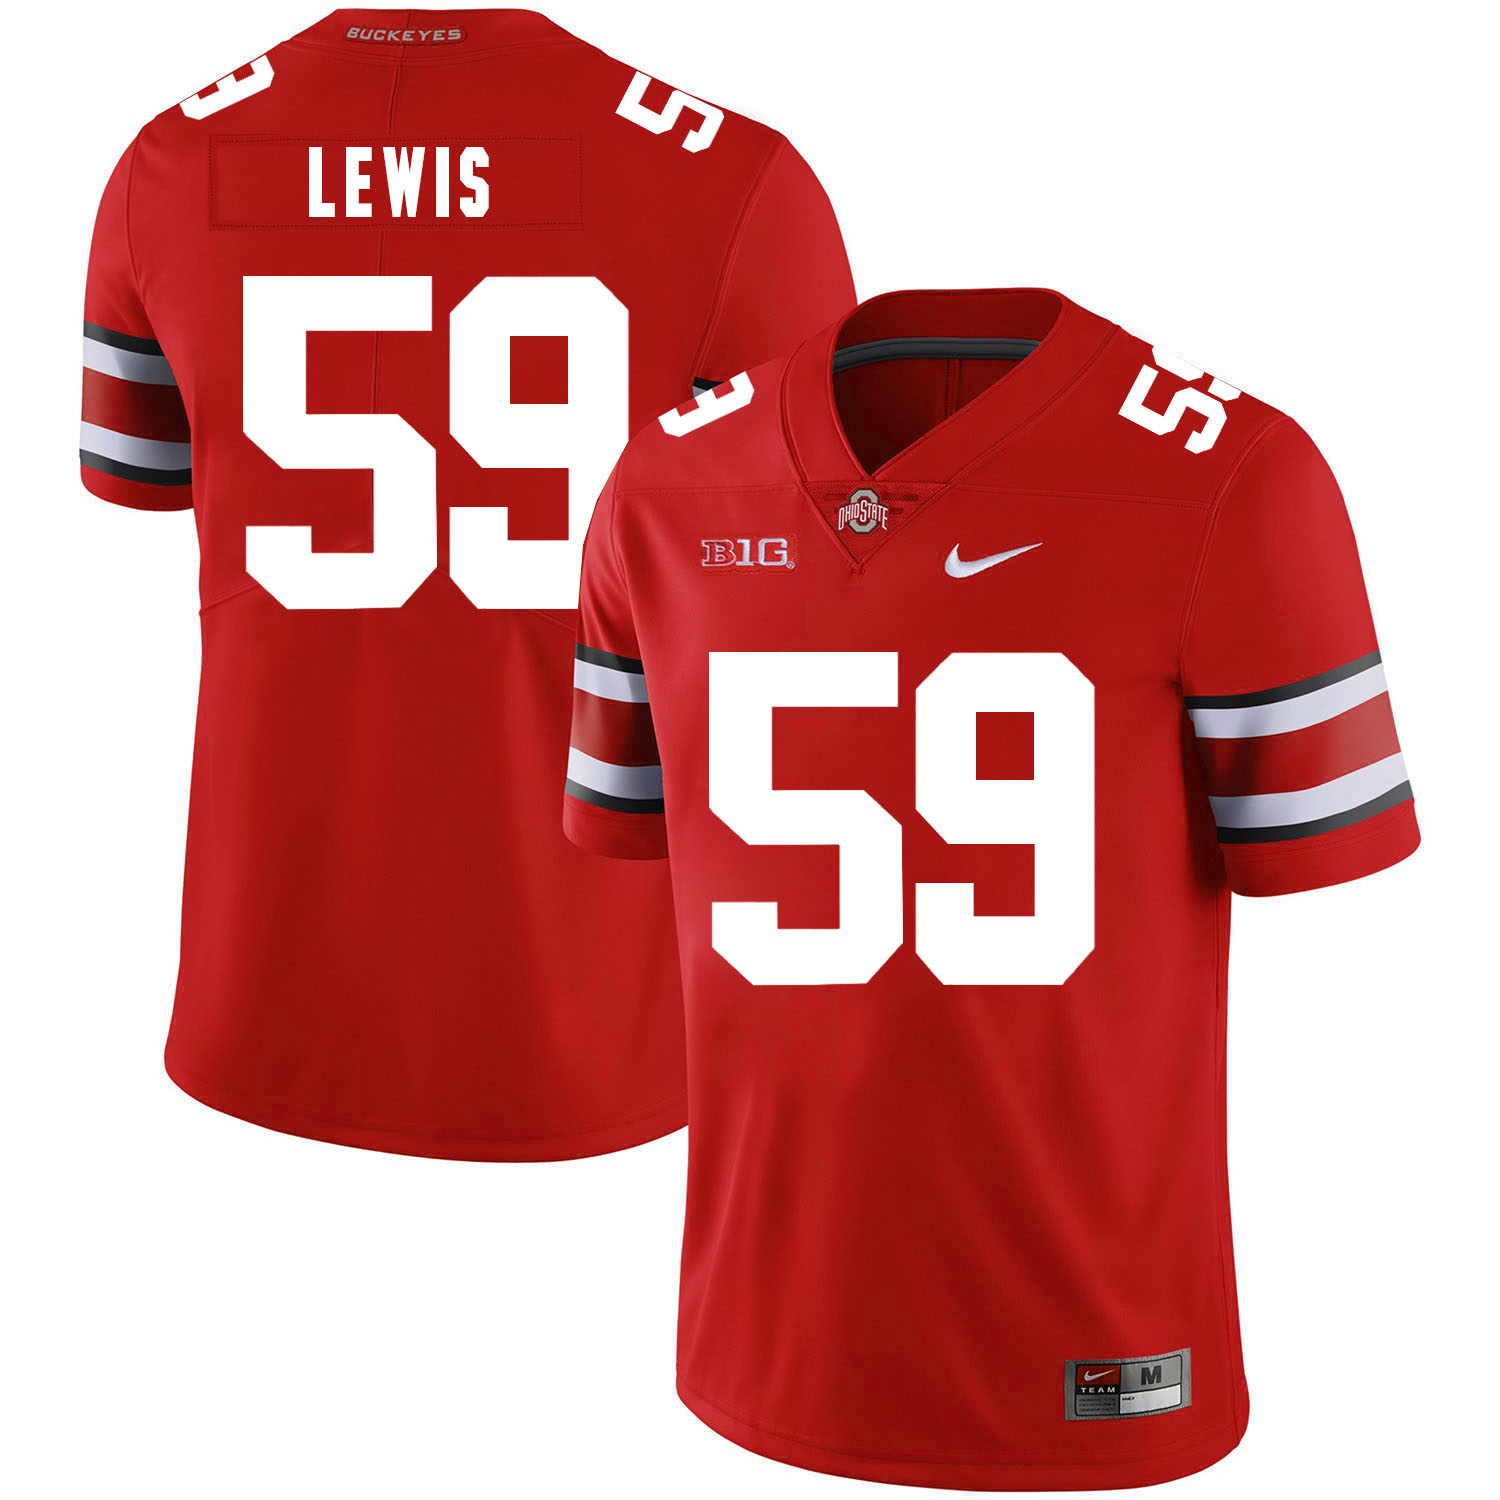 Ohio State Buckeyes 59 Tyquan Lewis Red Nike College Football Jersey